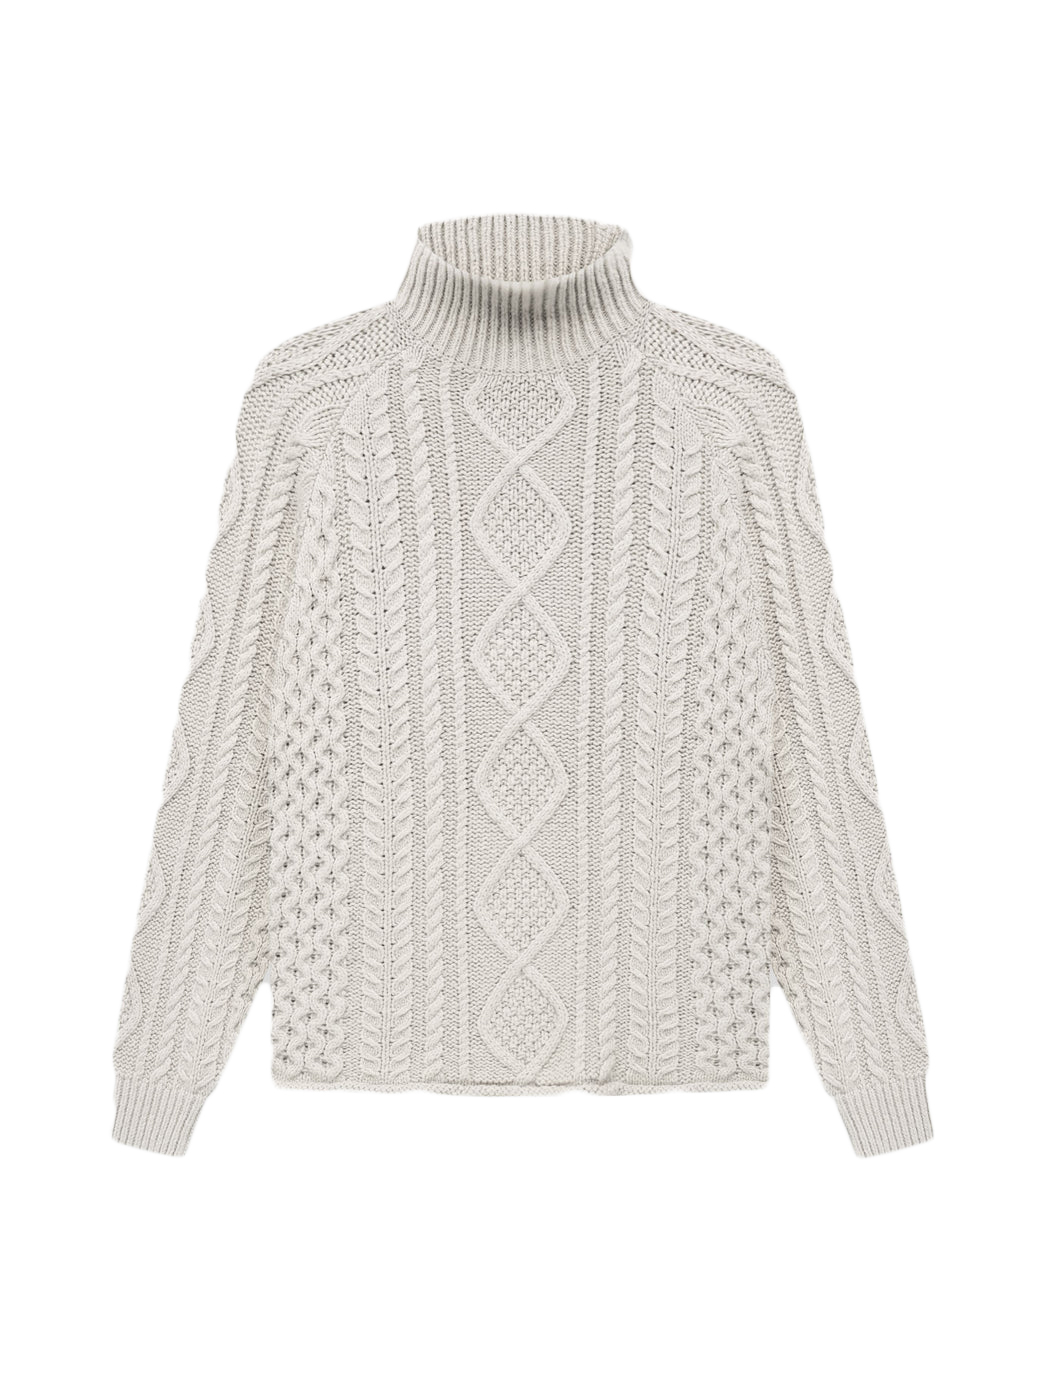 Fear of God Essentials Cable Knit Turtleneck Wheat メンズ - SS22 - JP